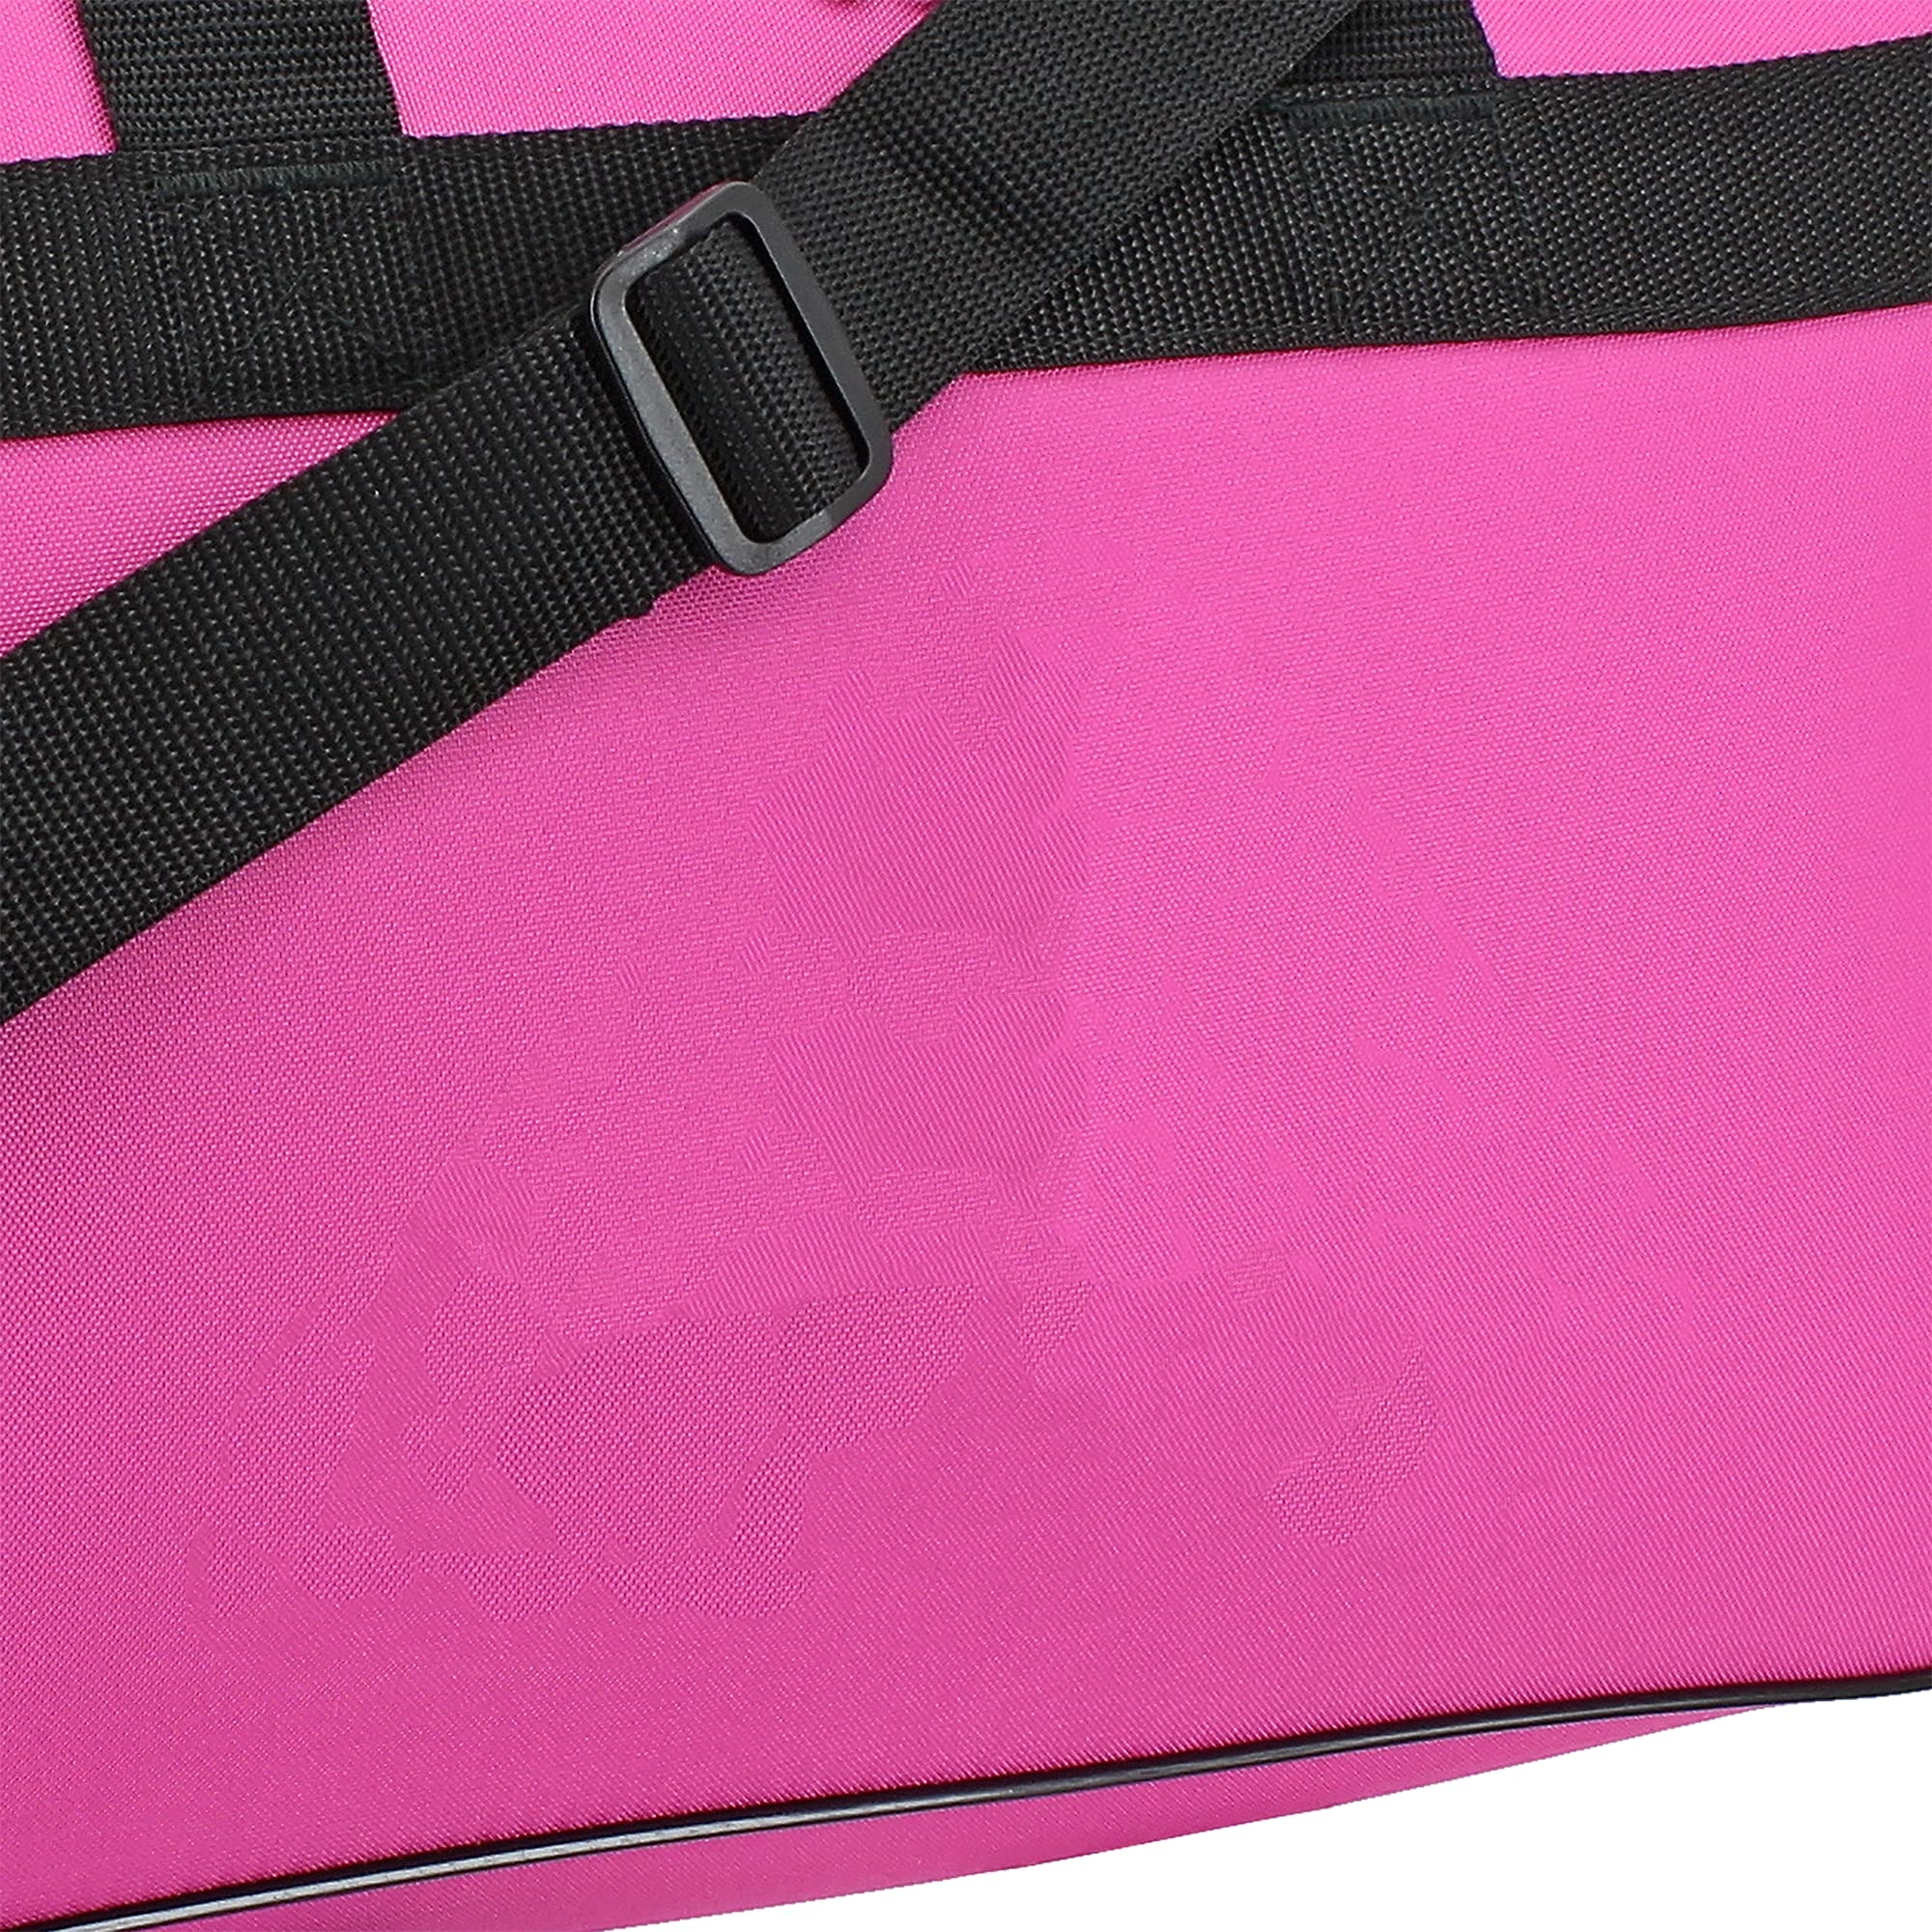 Recycled Polyester Small Duffel Bag Wholesale Product Details